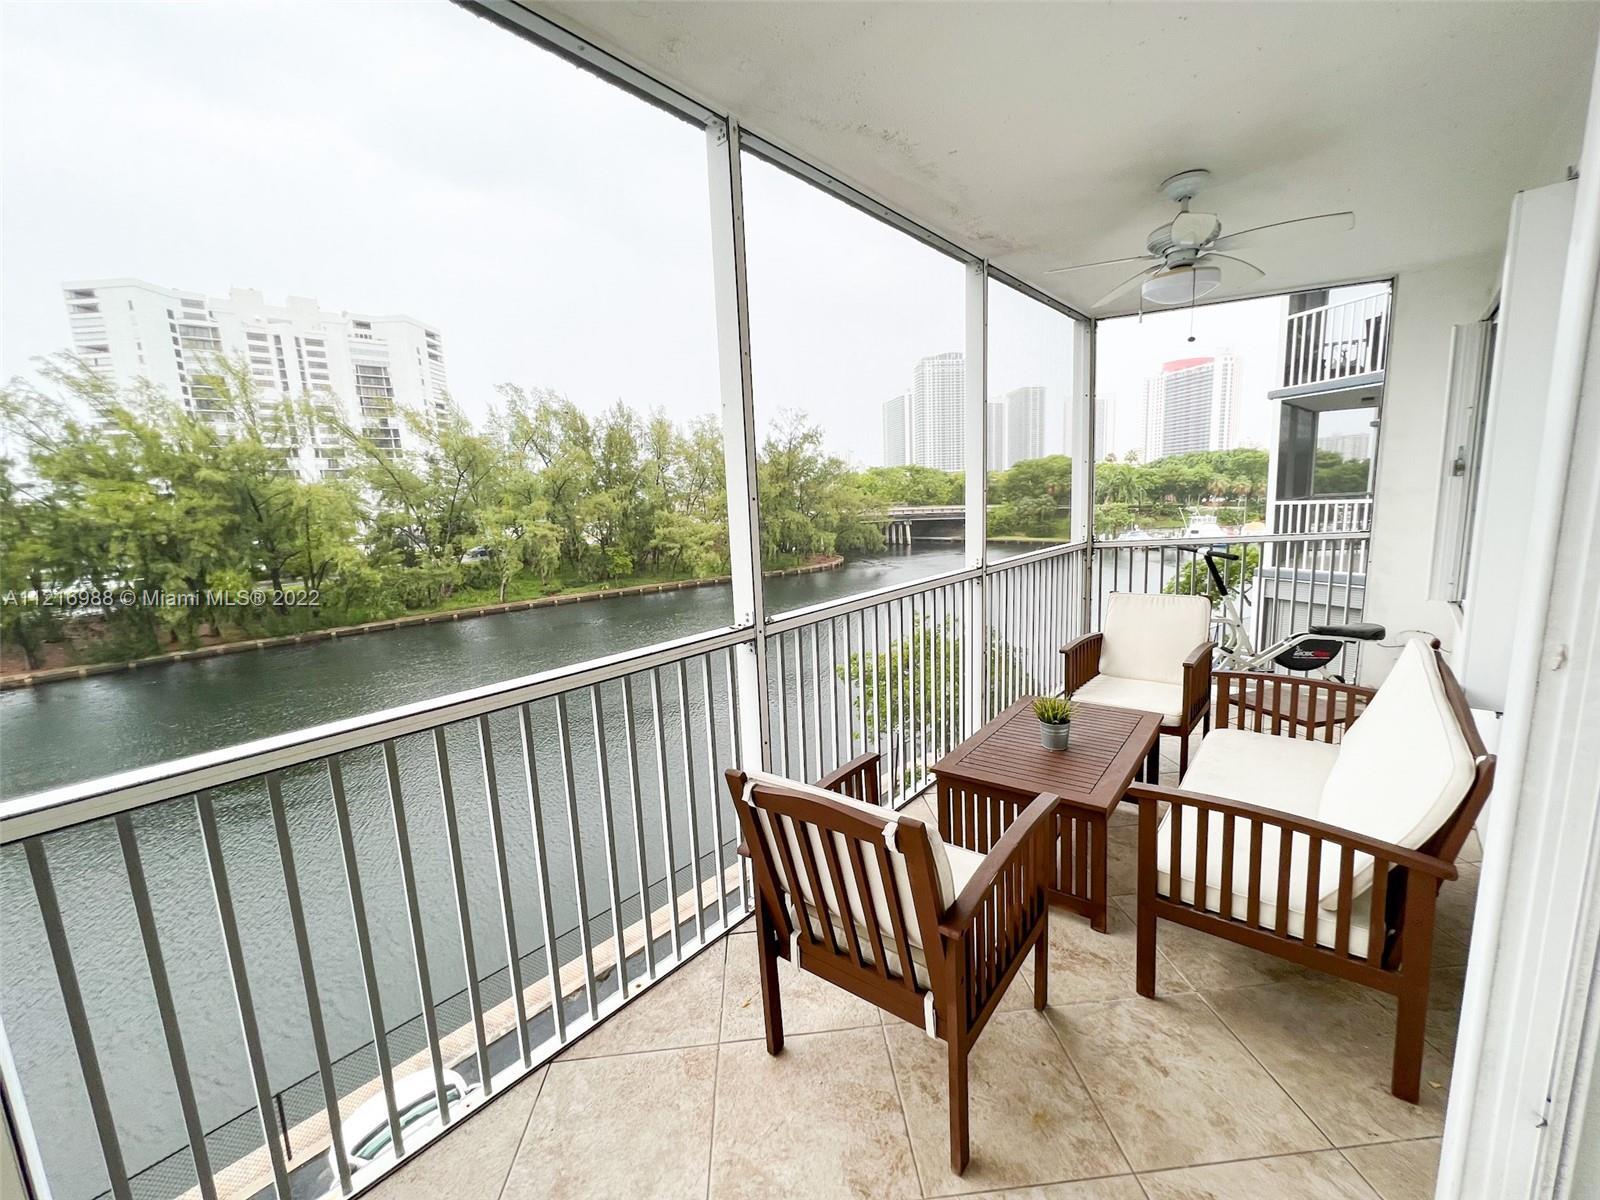 BEST DEAL IN THE BUILDING! GREAT OPPORTUNITY TO OWN THIS SPACIOUS 2 BED/2 BATH CONDO.  THE LIVING AR